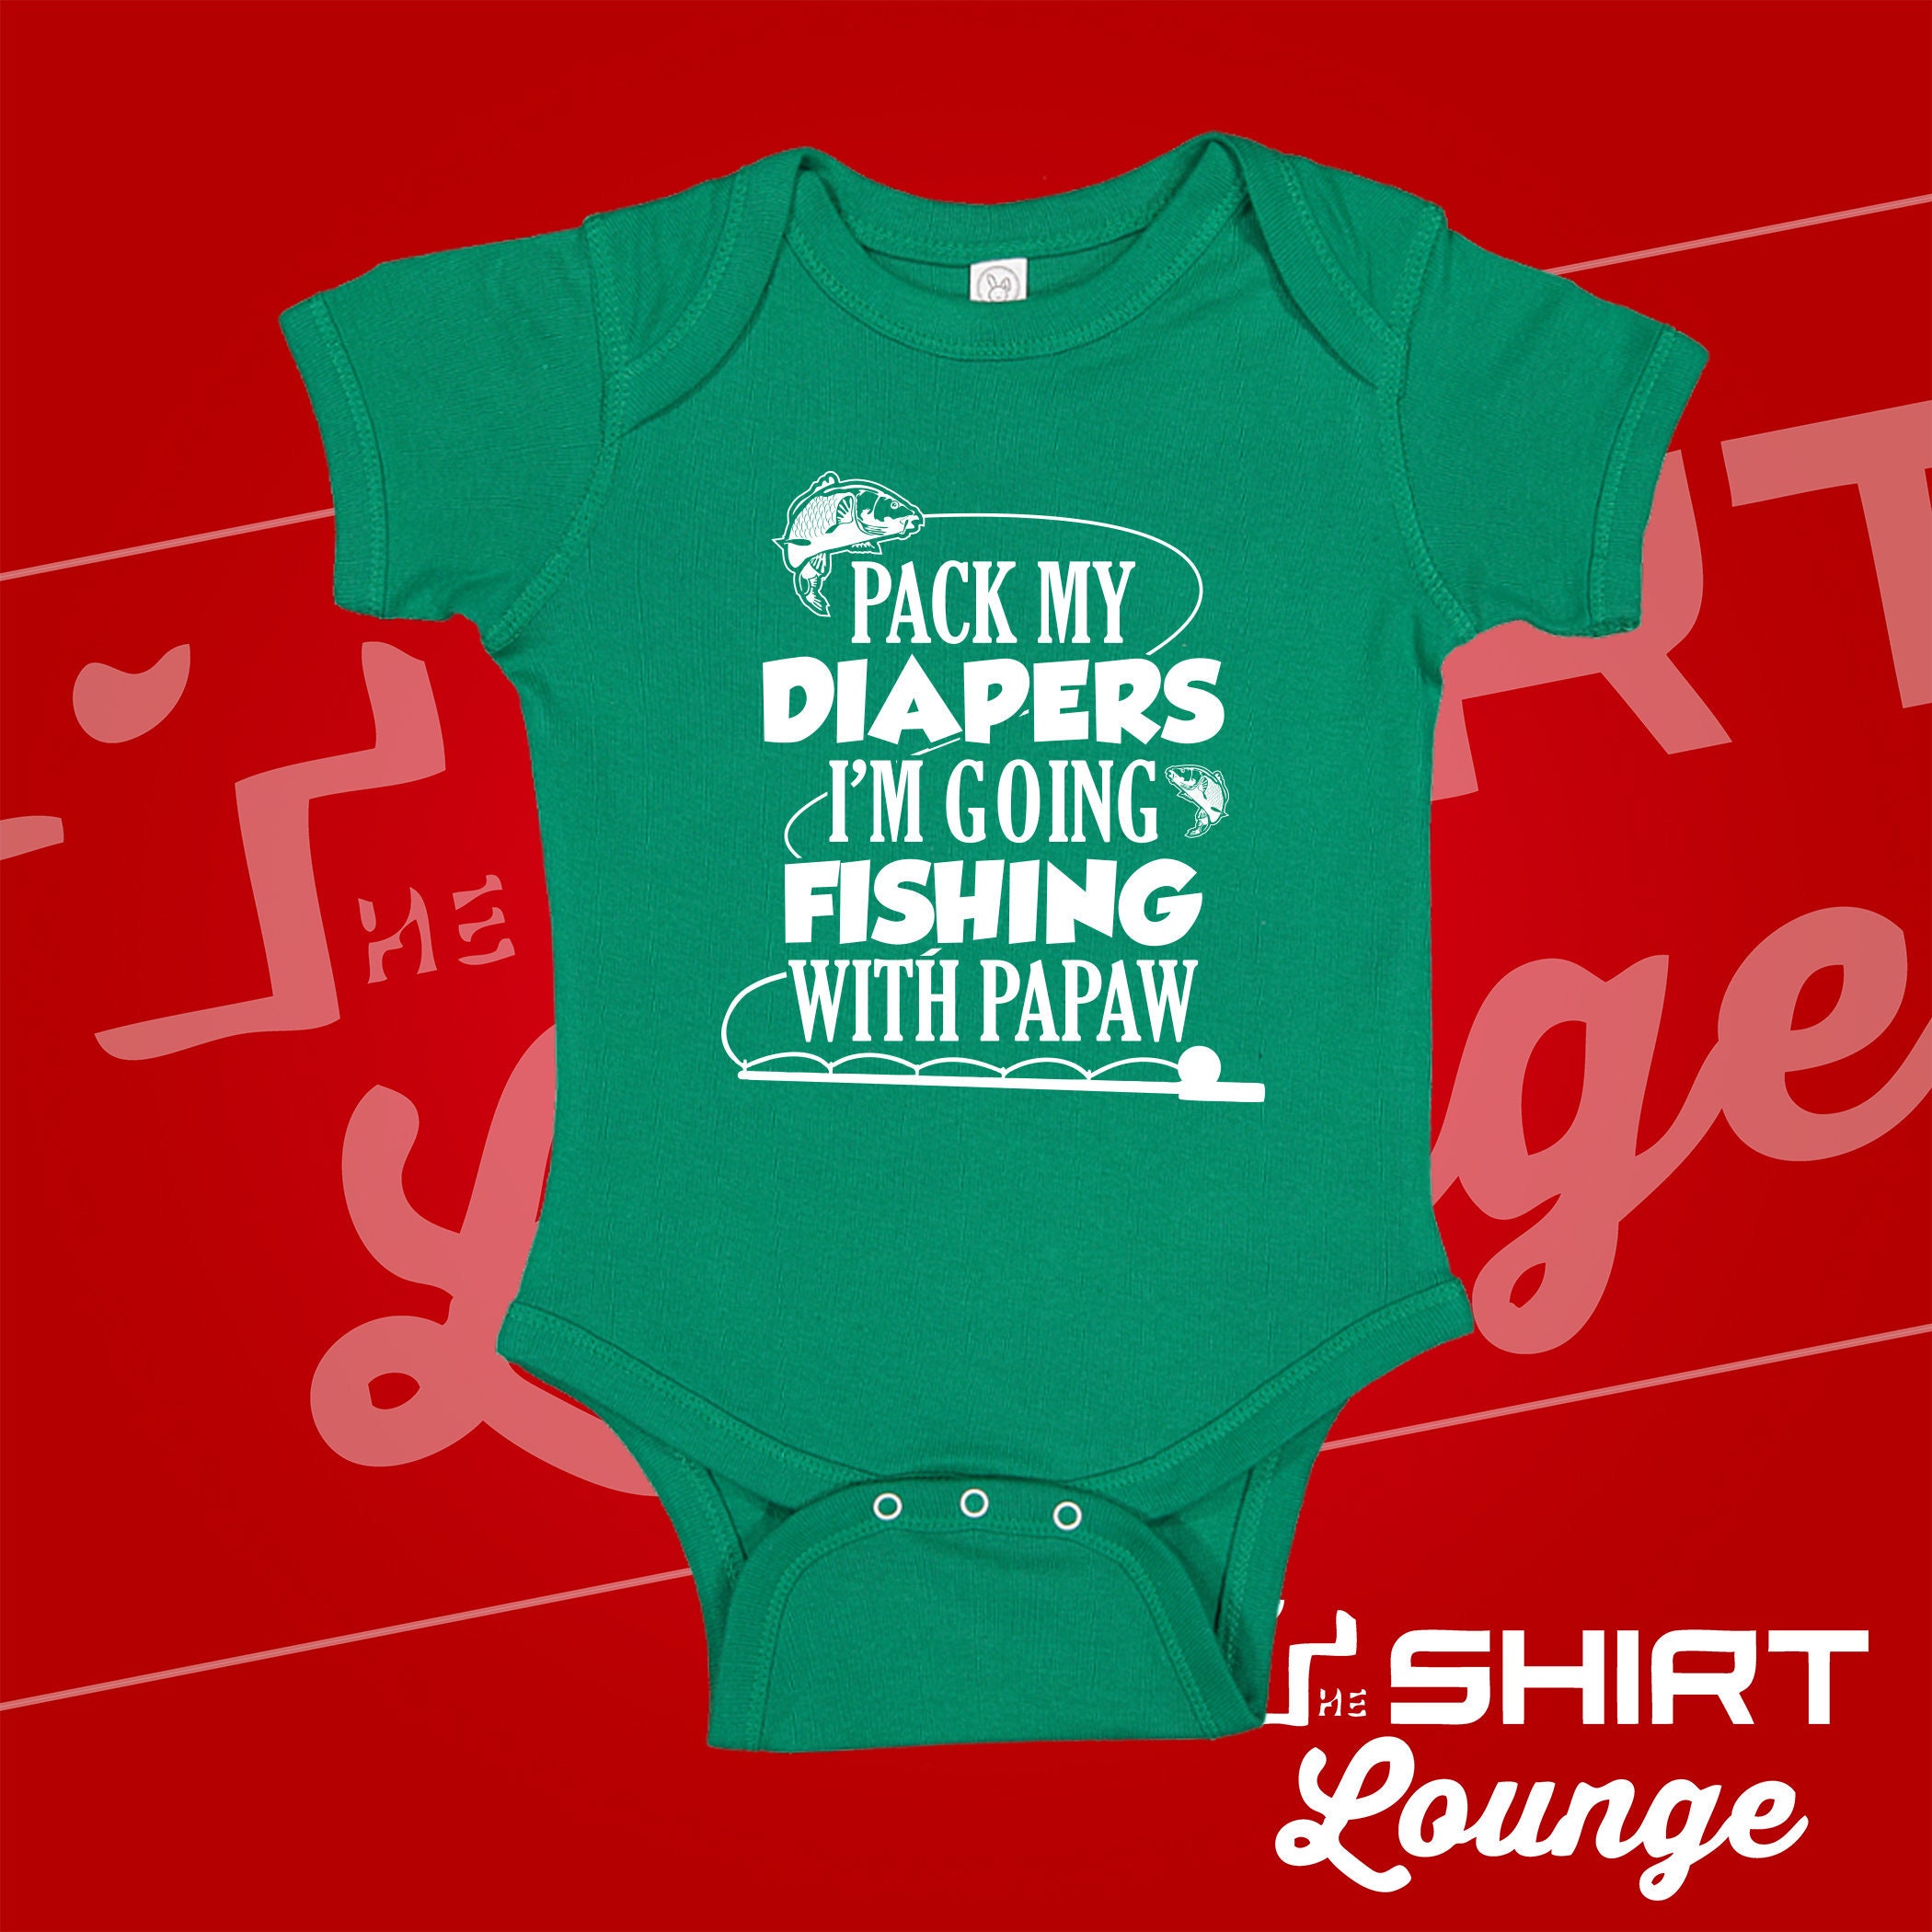 I'm Going Fishing With My Papaw Baby Bodysuit One Piece Toddler T